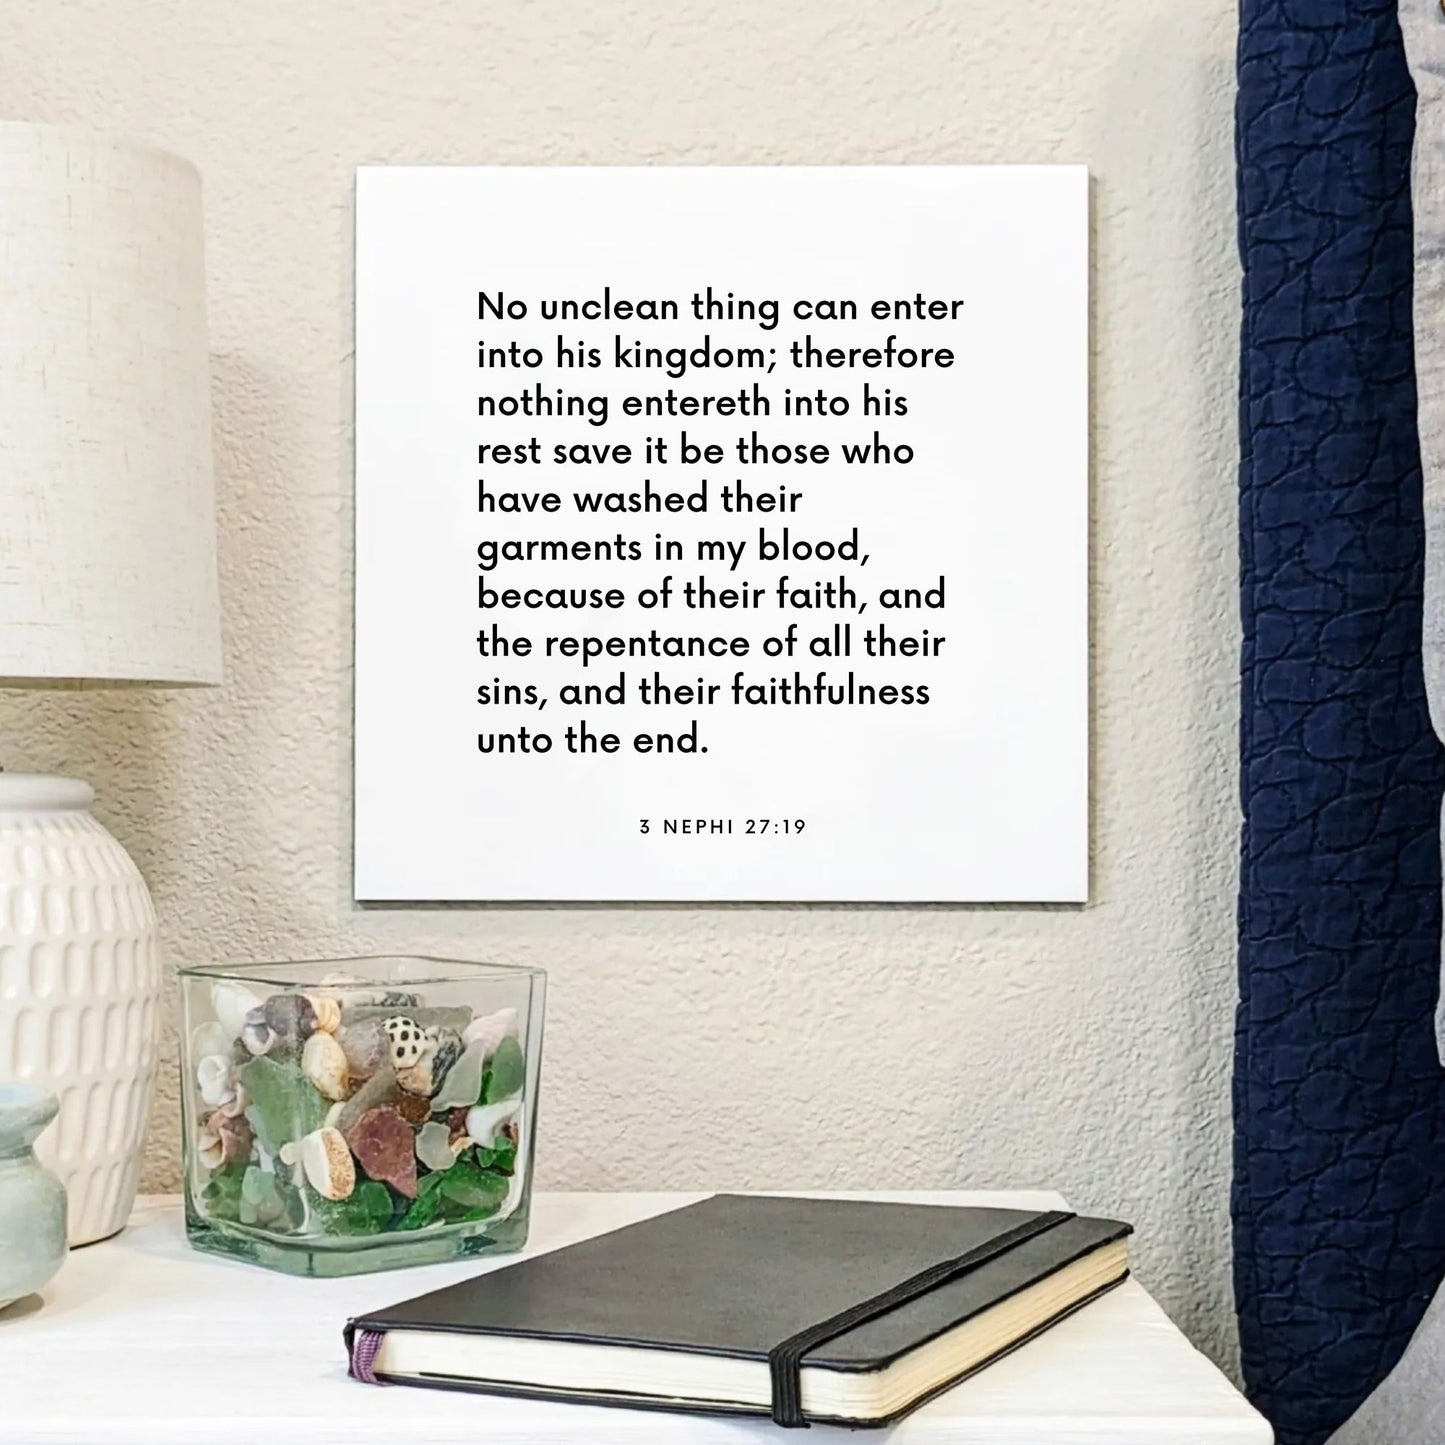 Bedside mouting of the scripture tile for 3 Nephi 27:19 - "No unclean thing can enter into his kingdom"